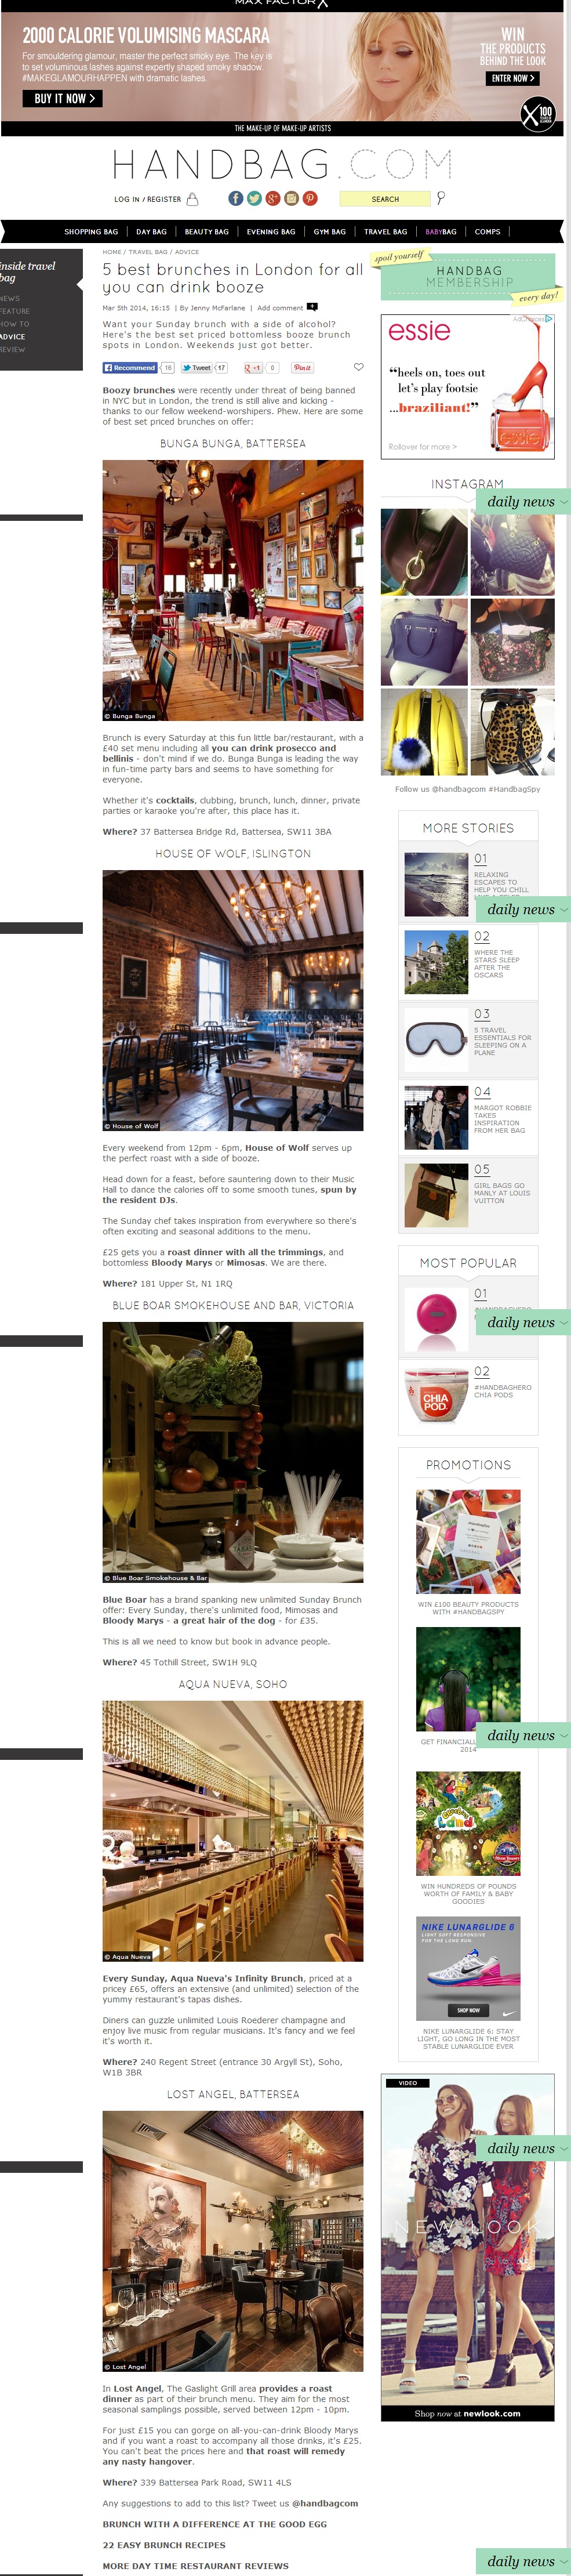 screencapture-www-handbag-com-travel-bag-advice-a554663-5-best-brunches-in-london-for-all-you-can-drink-booze-html